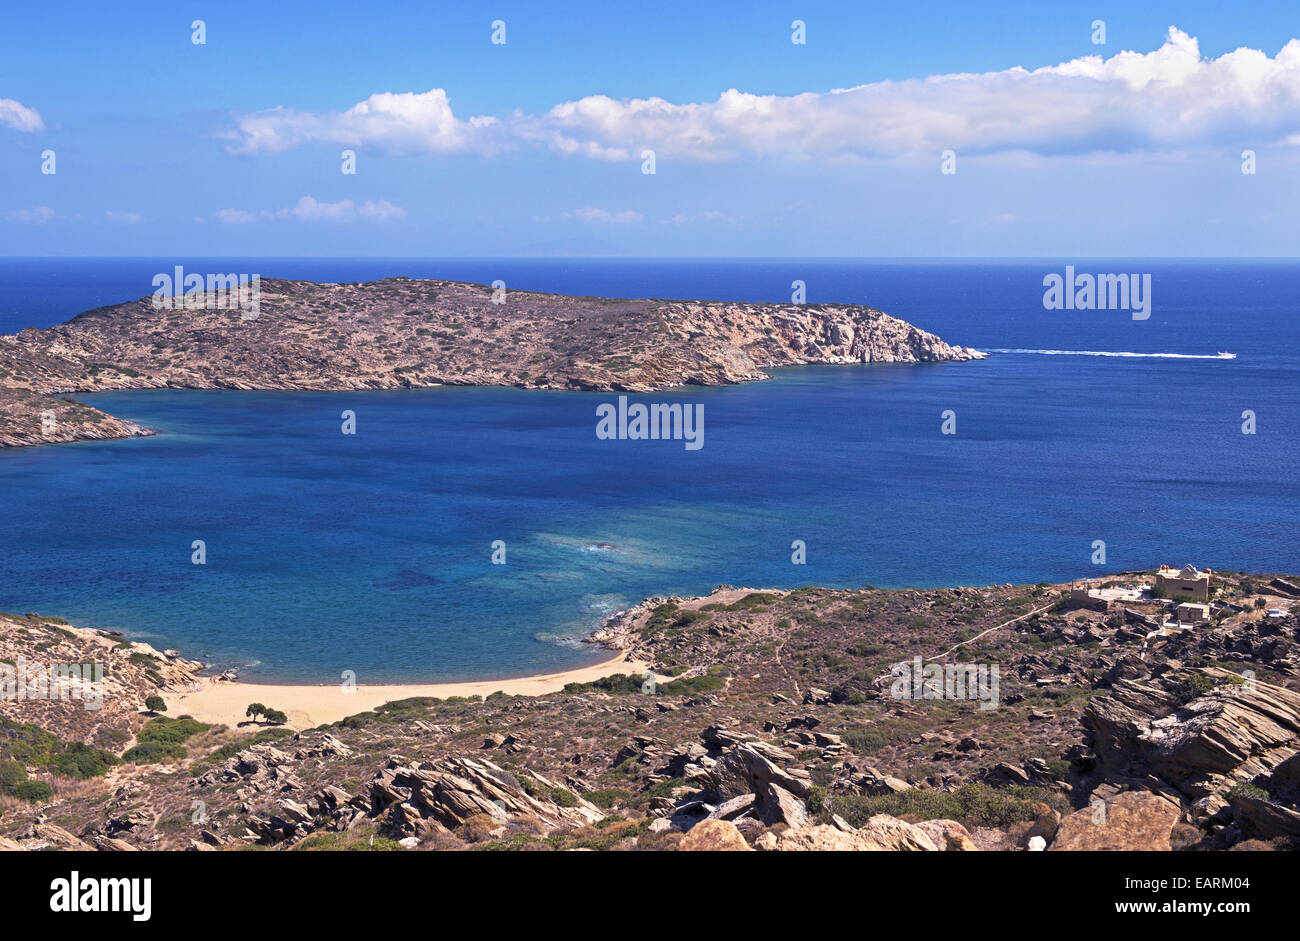 The secluded 'Tris Klisies'  bay situated near the magnificent Maganari beach in Ios island, Cyclades, Greece Stock Photo